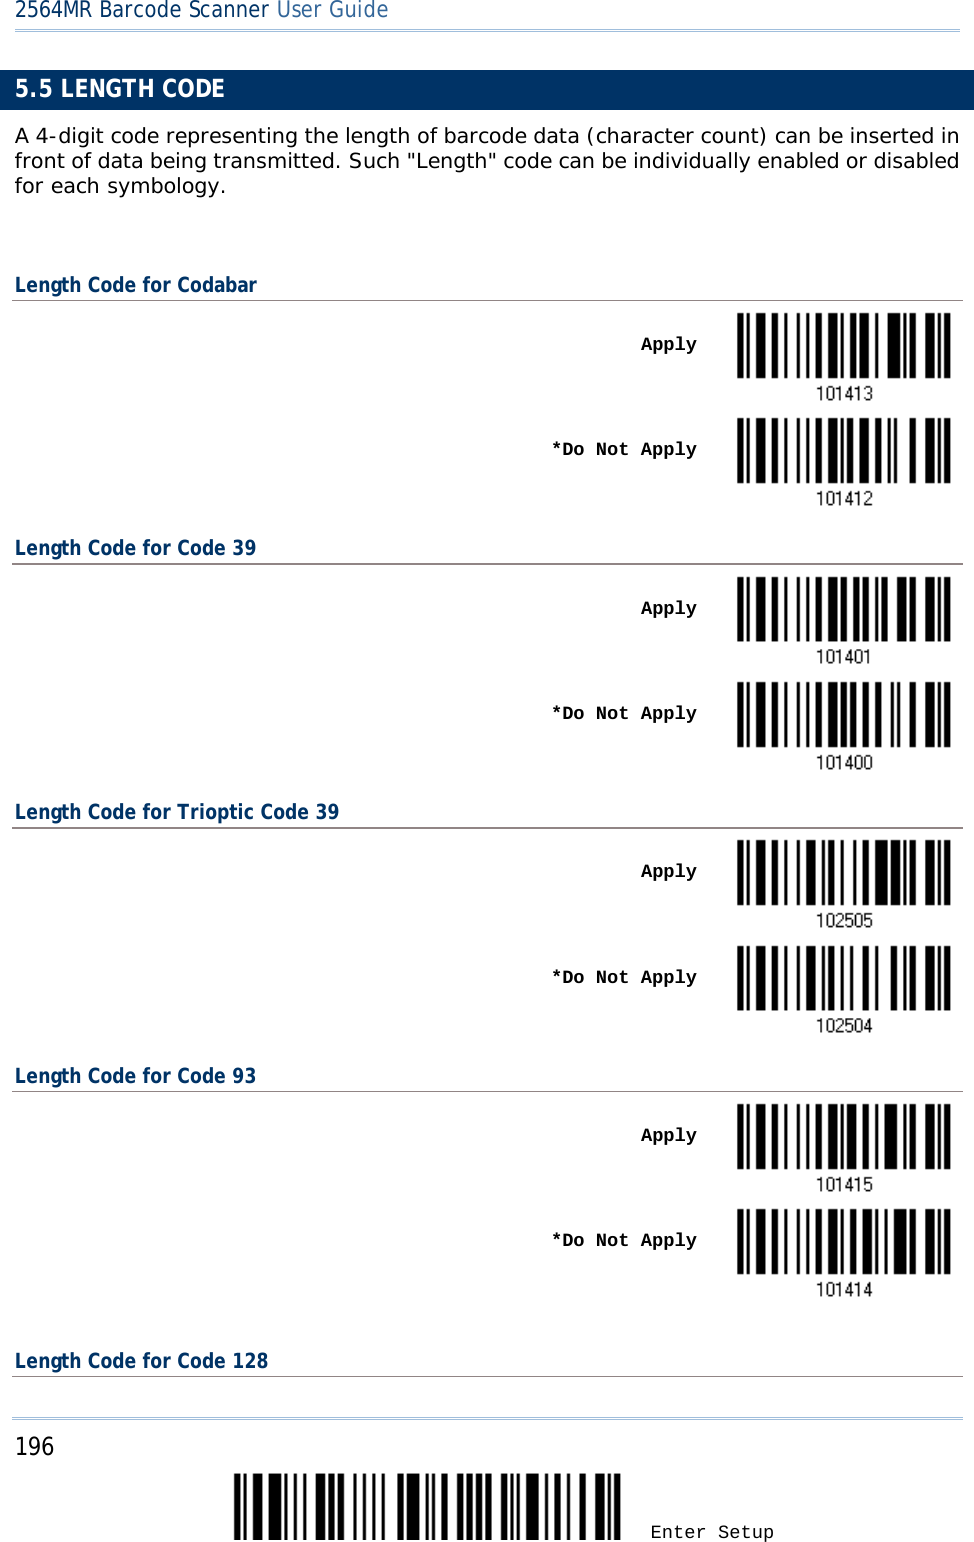 2564MR Barcode Scanner User Guide  5.5 LENGTH CODE A 4-digit code representing the length of barcode data (character count) can be inserted in front of data being transmitted. Such &quot;Length&quot; code can be individually enabled or disabled for each symbology.  Length Code for Codabar    Apply     *Do Not Apply  Length Code for Code 39    Apply     *Do Not Apply  Length Code for Trioptic Code 39    Apply     *Do Not Apply  Length Code for Code 93    Apply     *Do Not Apply   Length Code for Code 128 196 Enter Setup 